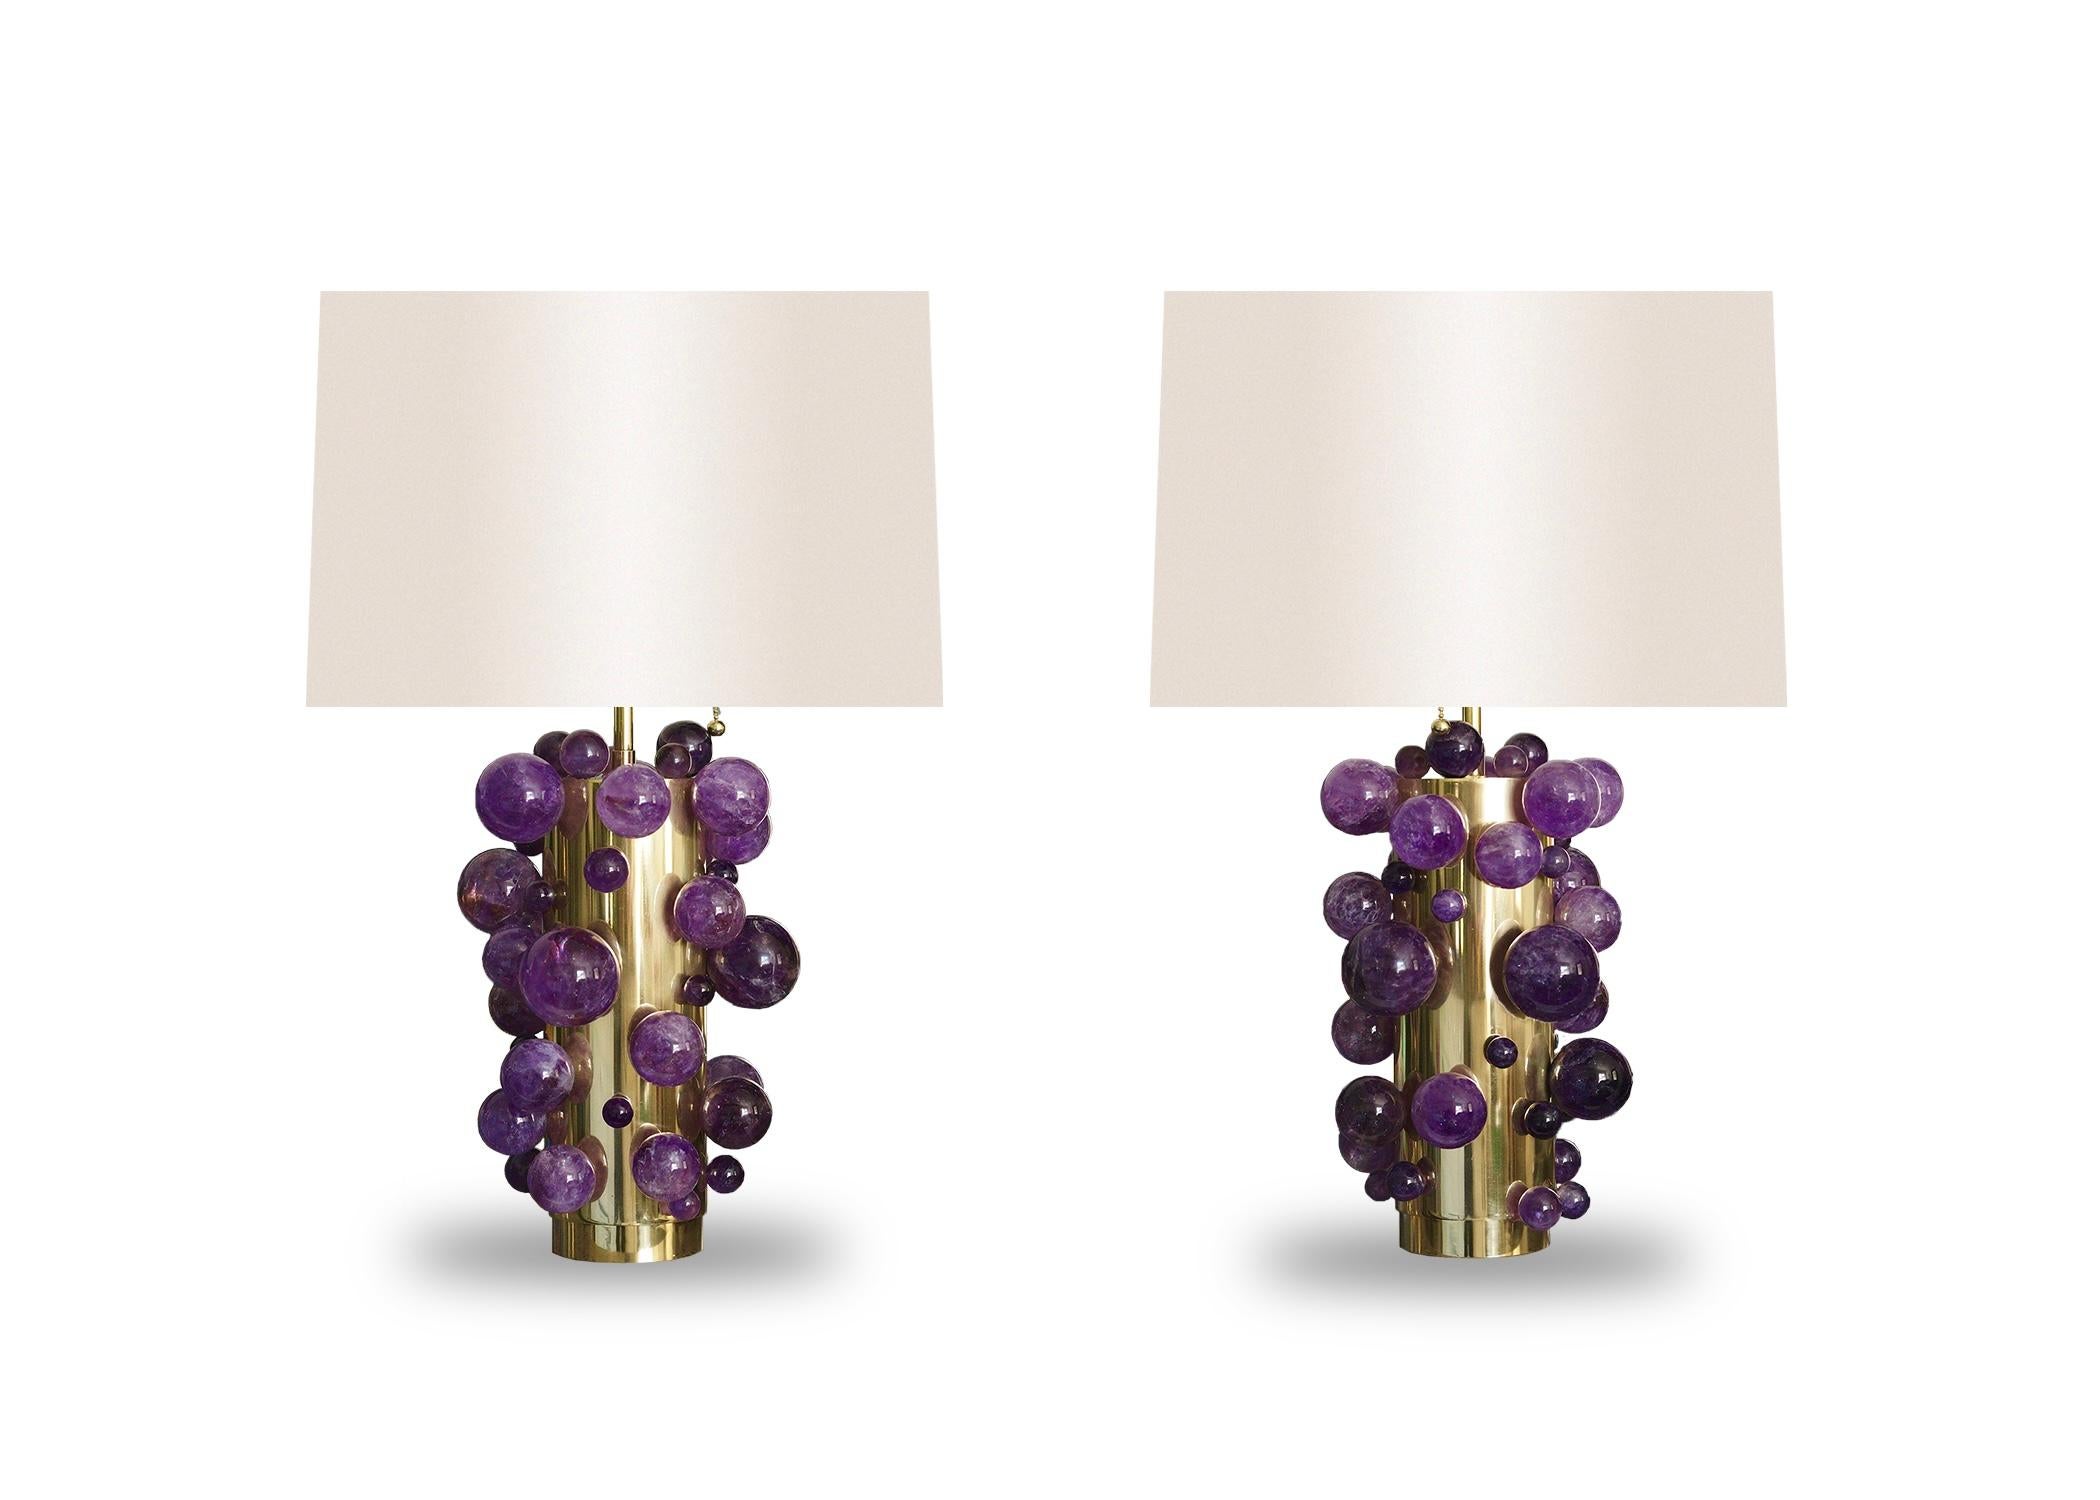 Pair of natural Amethyst bubble lamps with polished brass mounts. Created by Phoenix gallery NYC.
To the top of the rock crystal bubble: 13.5